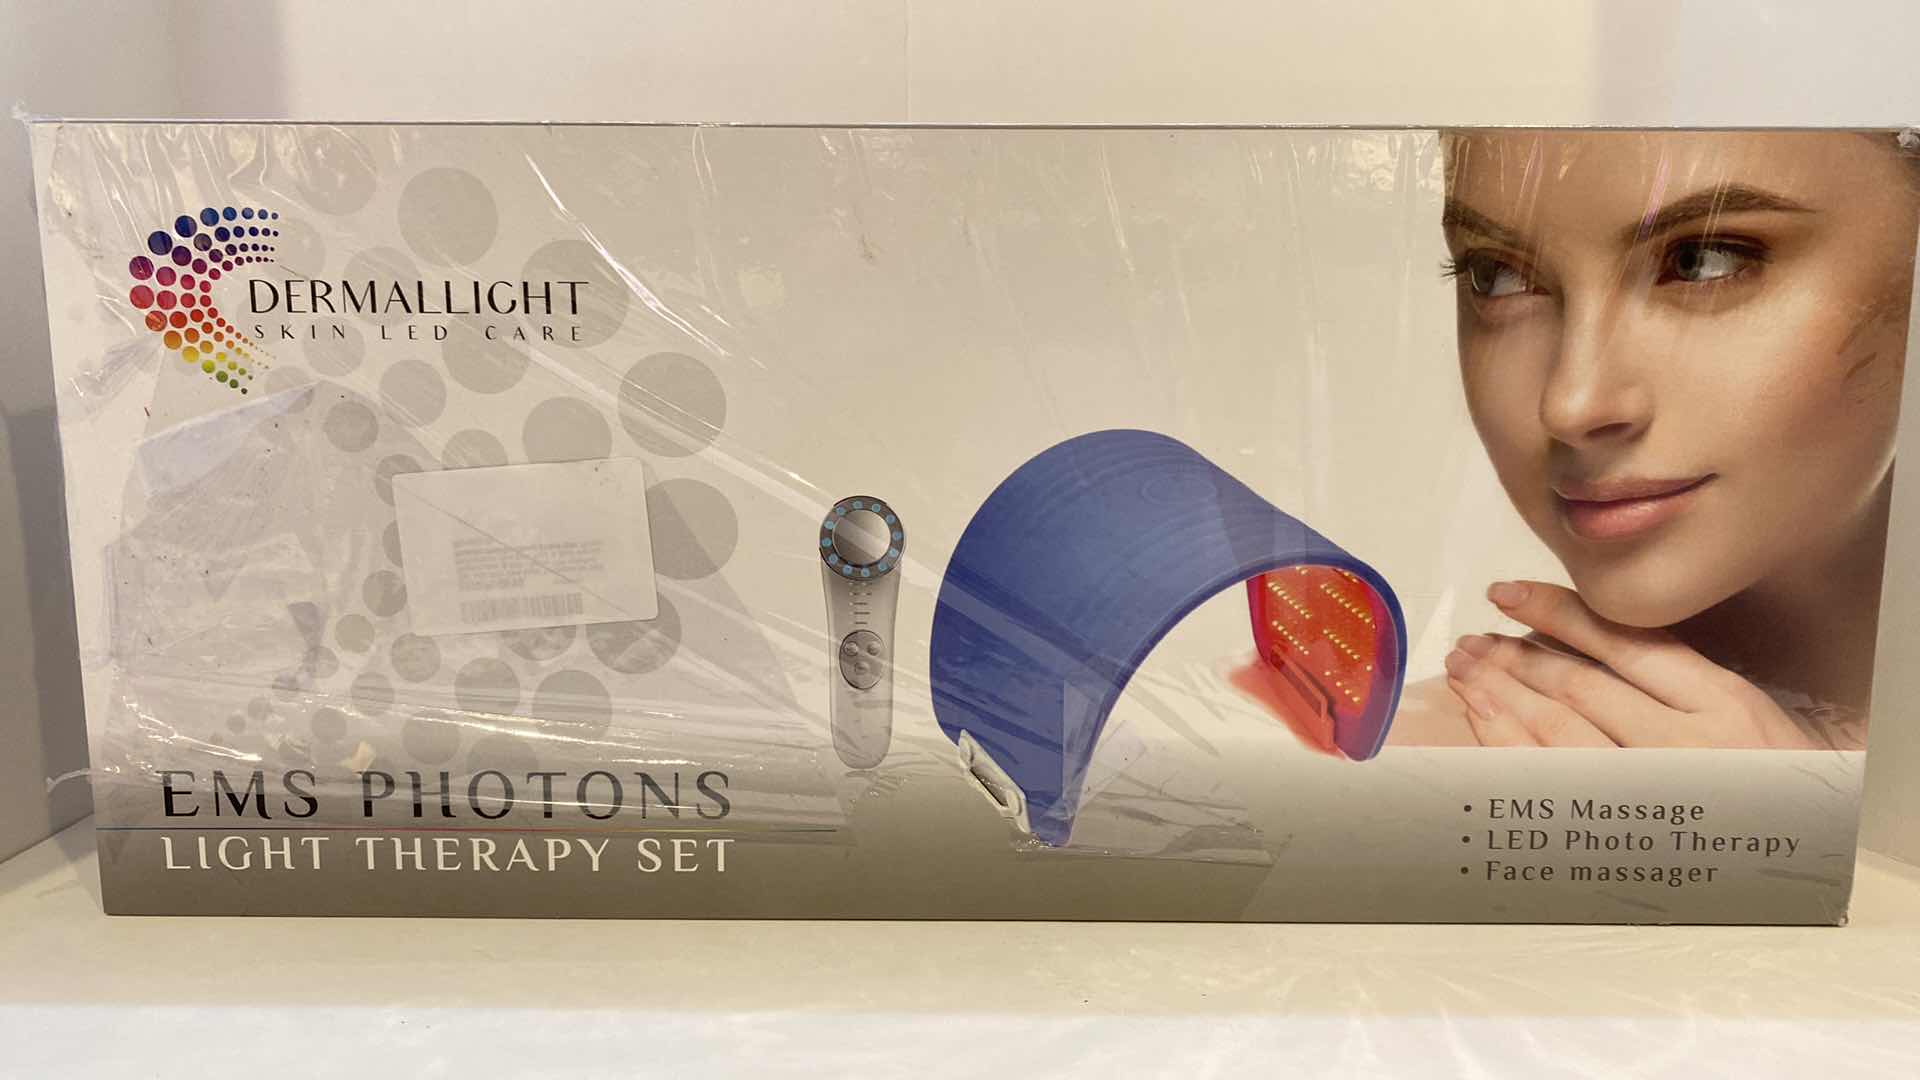 Photo 4 of NEW DERMALIGHT SKIN LED EMS PHOTONS LIGHT THERAPY SET FOR BODY AND FACE $2,500